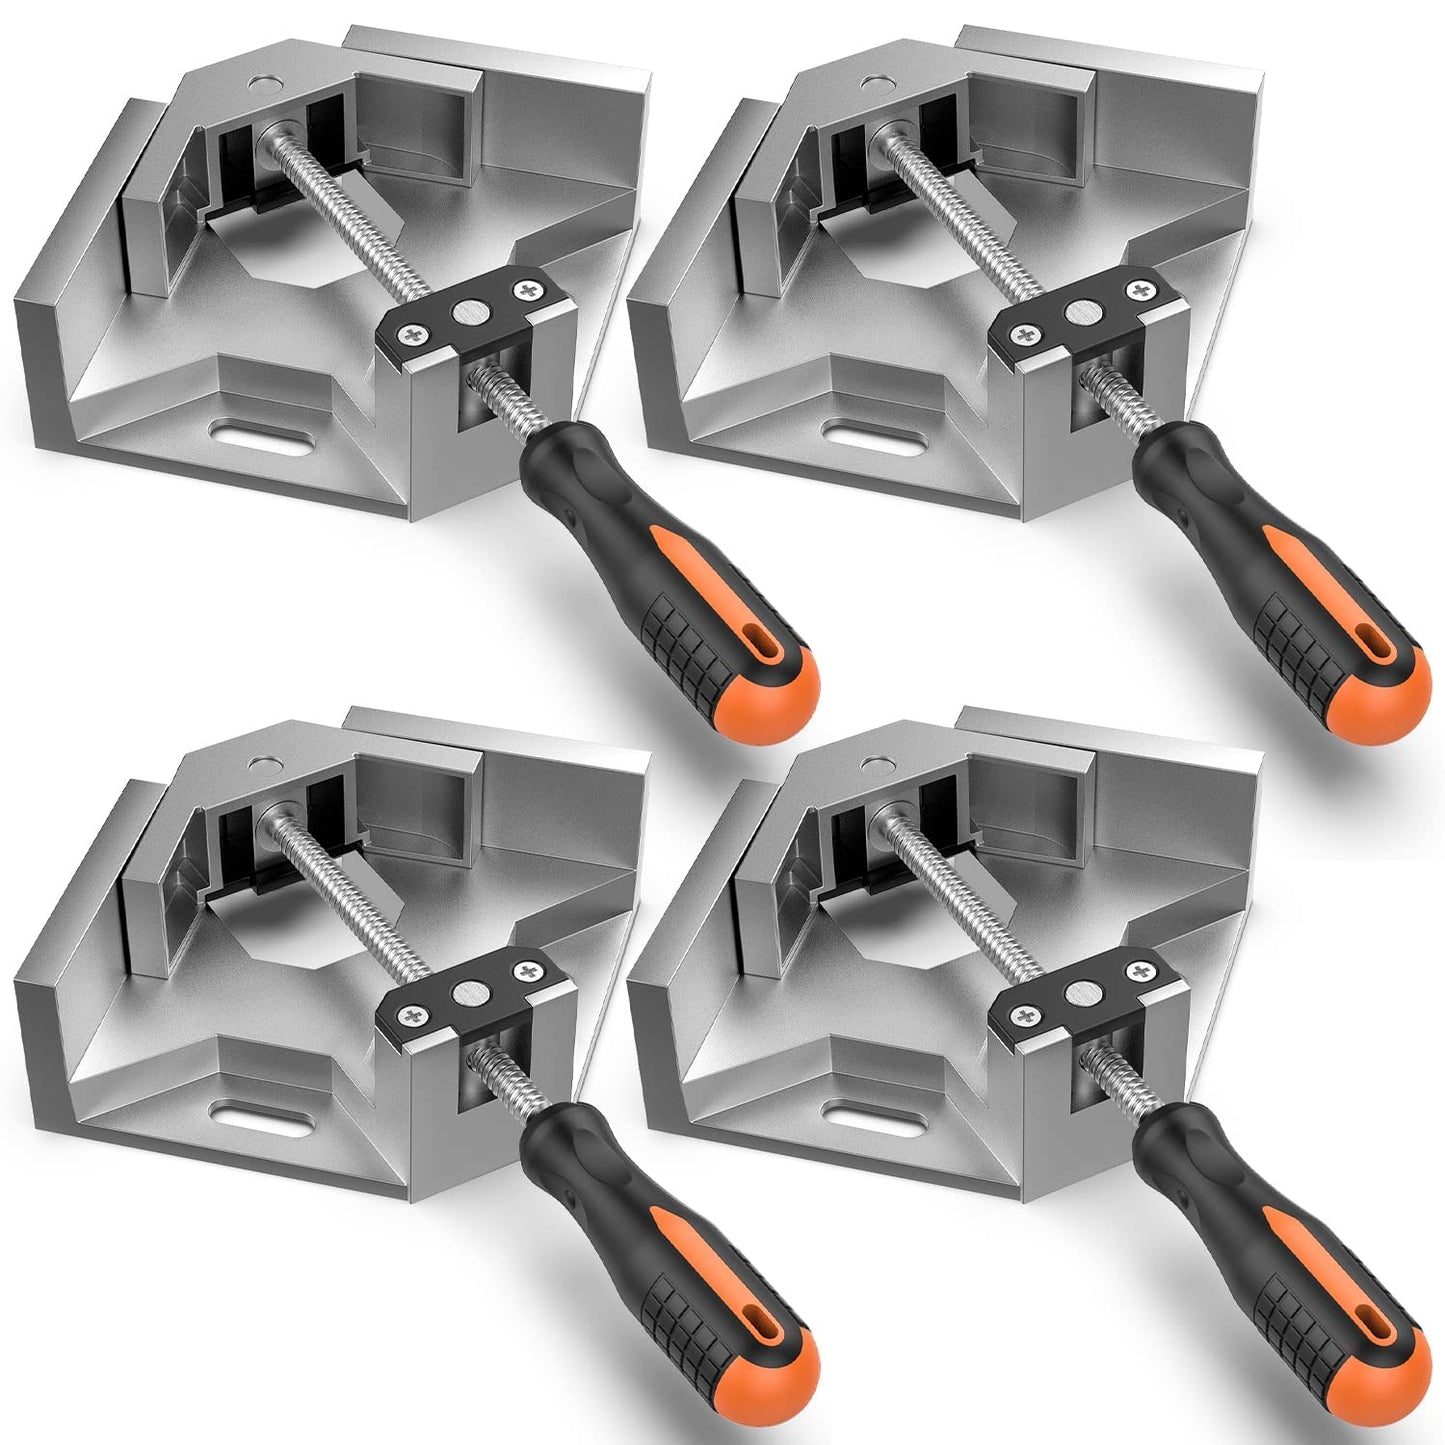 Right Angle Clamp, Housolution [4 PACK] Single Handle 90° Aluminum Alloy Corner Clamp, Clamps for Woodworking Adjustable Swing Jaw, Woodworking Tools